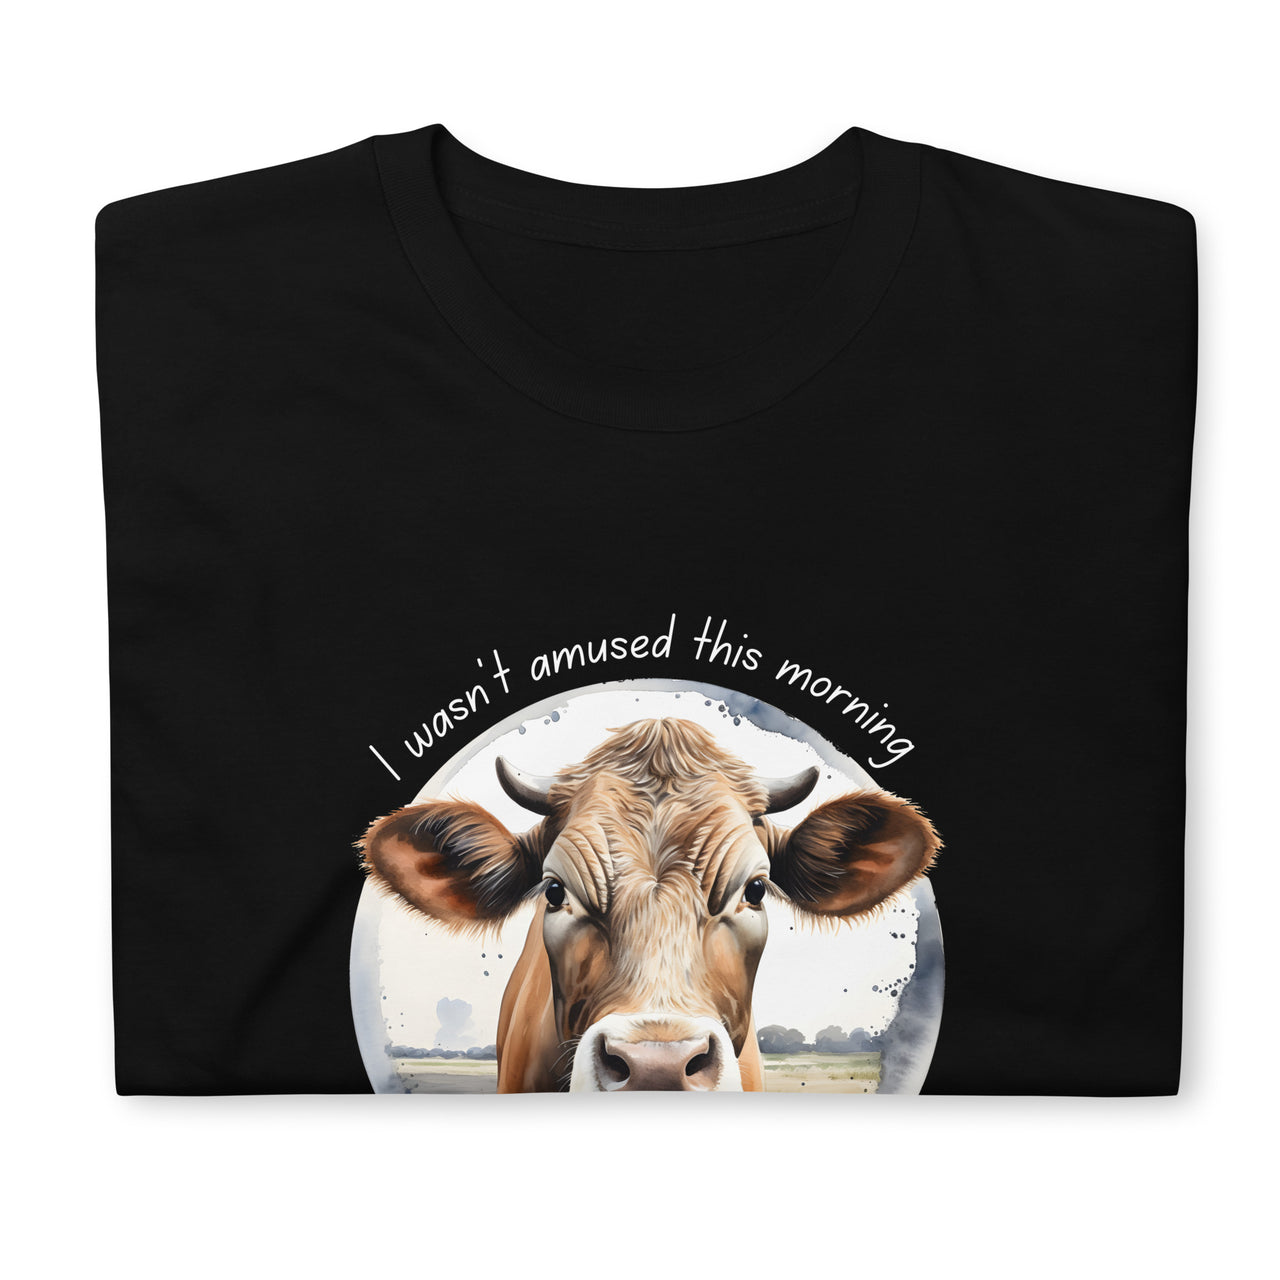 Cow Mood I Wasn't Amused This Morning T-Shirt